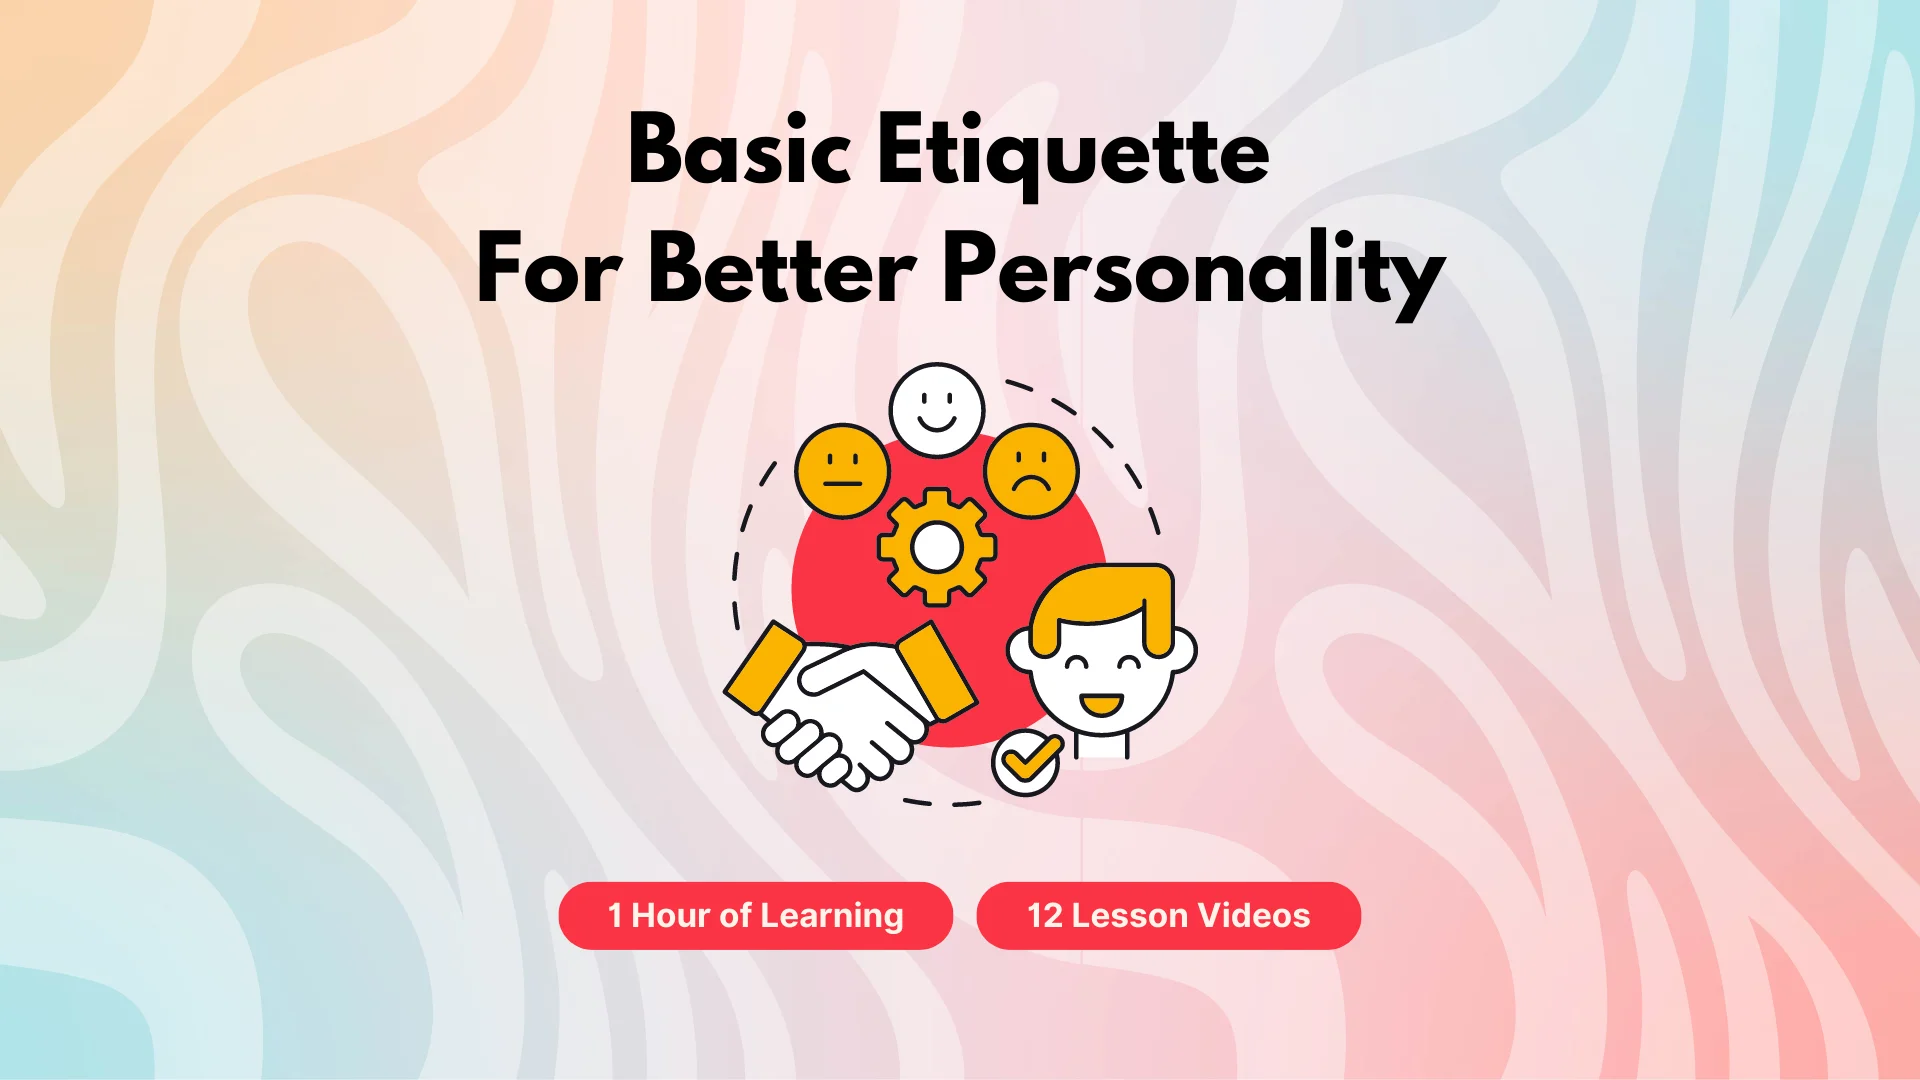 Basic Etiquette for Better Personality Course Image